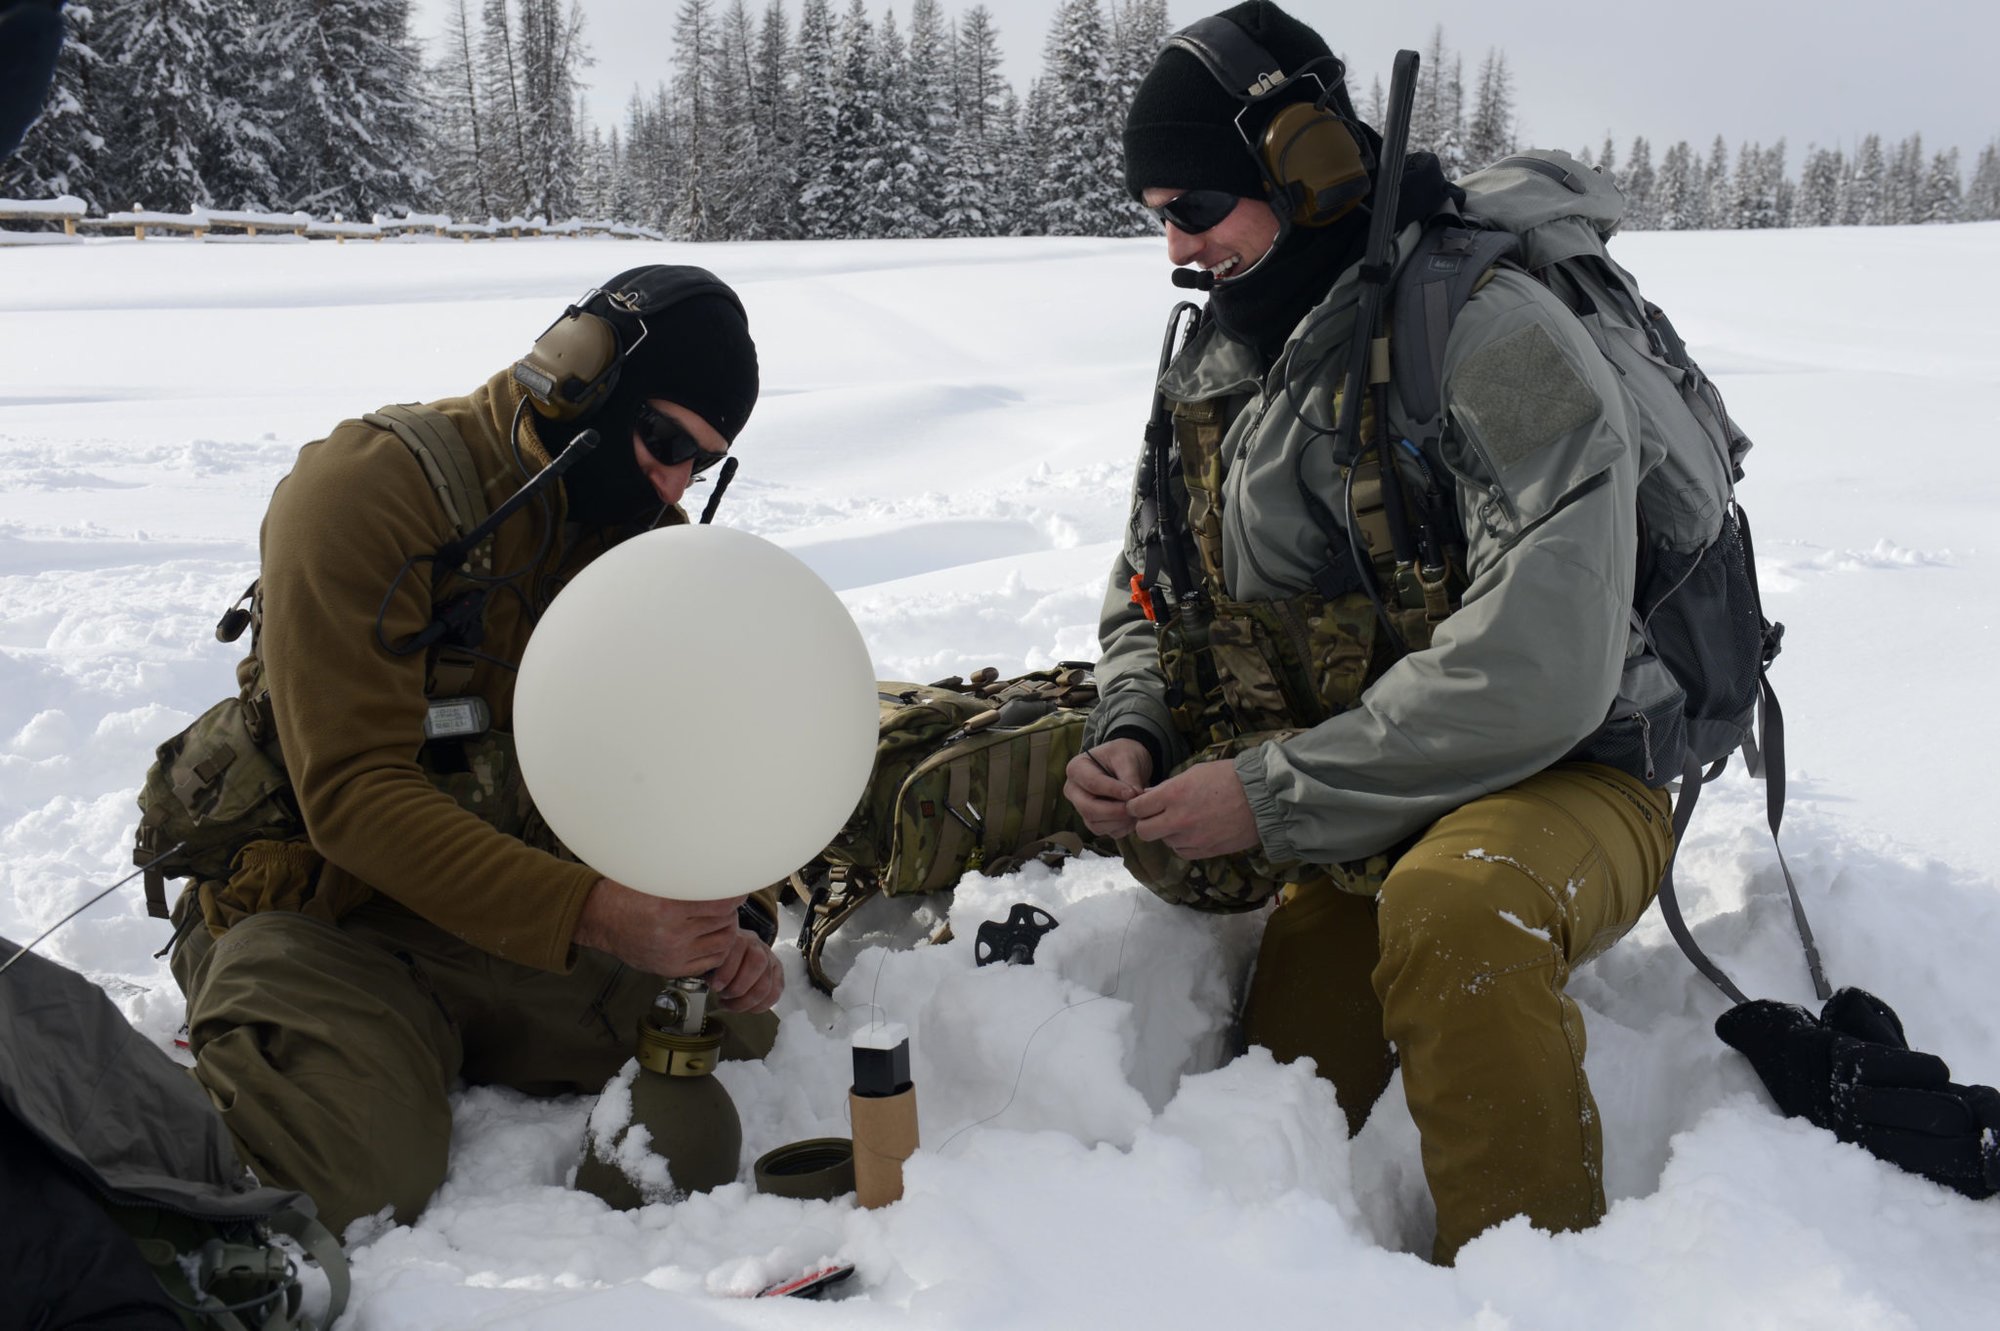 U.S. Air Force Special Tactics Airmen with the 24th Special Operations Wing perform avalanche training at Moran, Wyoming, Dec. 13, 2016. Special Operations Weather Team Airmen have been an integral piece of Special Tactics with unique training to conduct multi-domain reconnaissance and surveillance across the spectrum of conflict and crisis. Photo by Staff Sgt. Sandra Welch/U.S. Air Force.